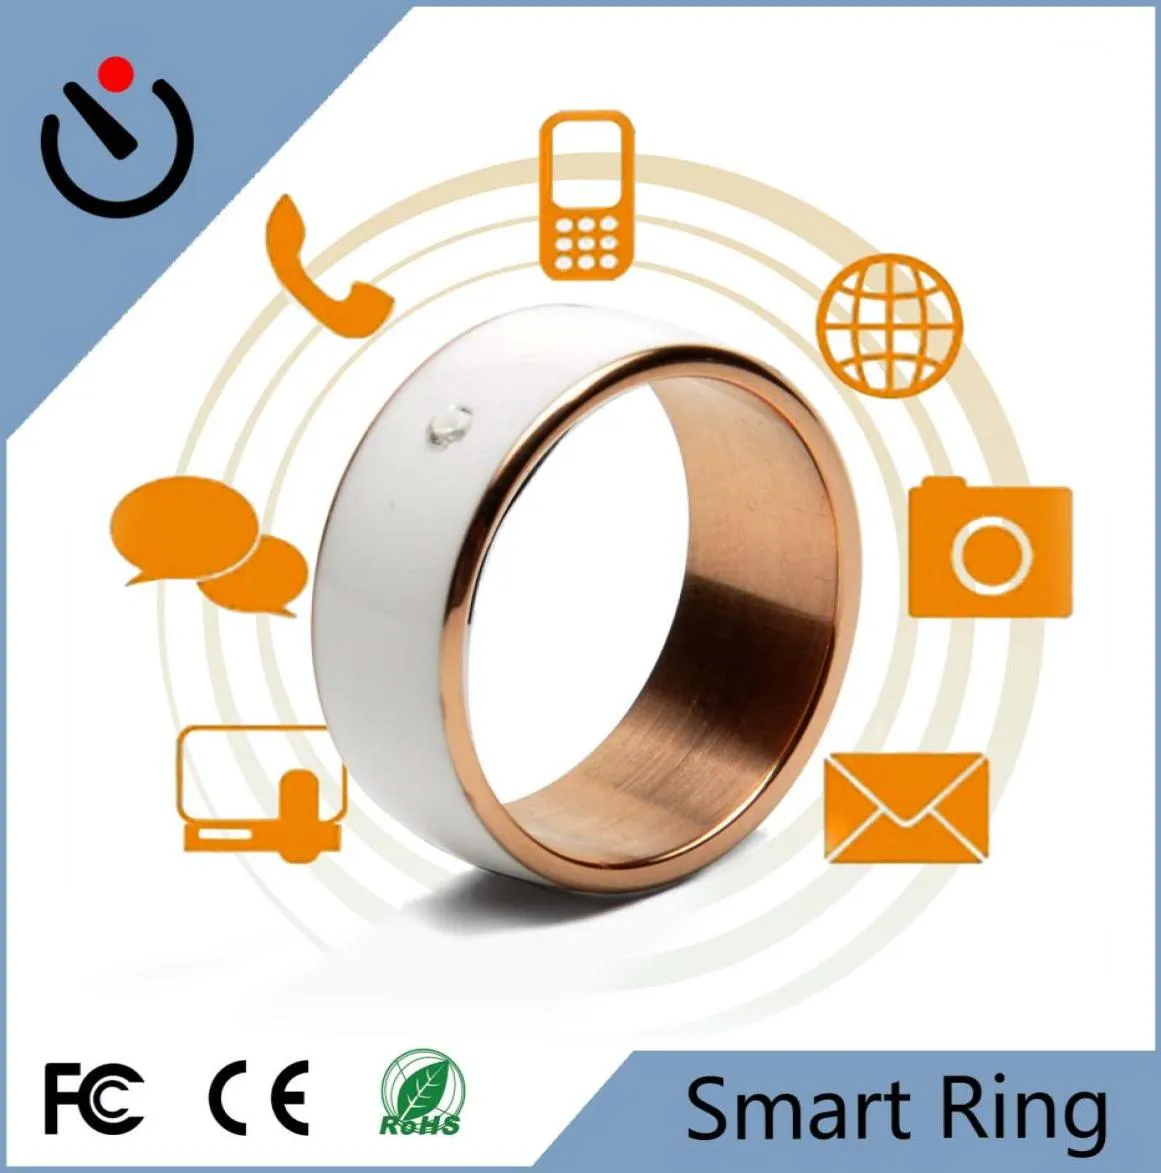 Smart Ring NFC Android WP Smart Electronics Smart Devices Magic Intelligent comme Mobiles Camara Detector MP31783238